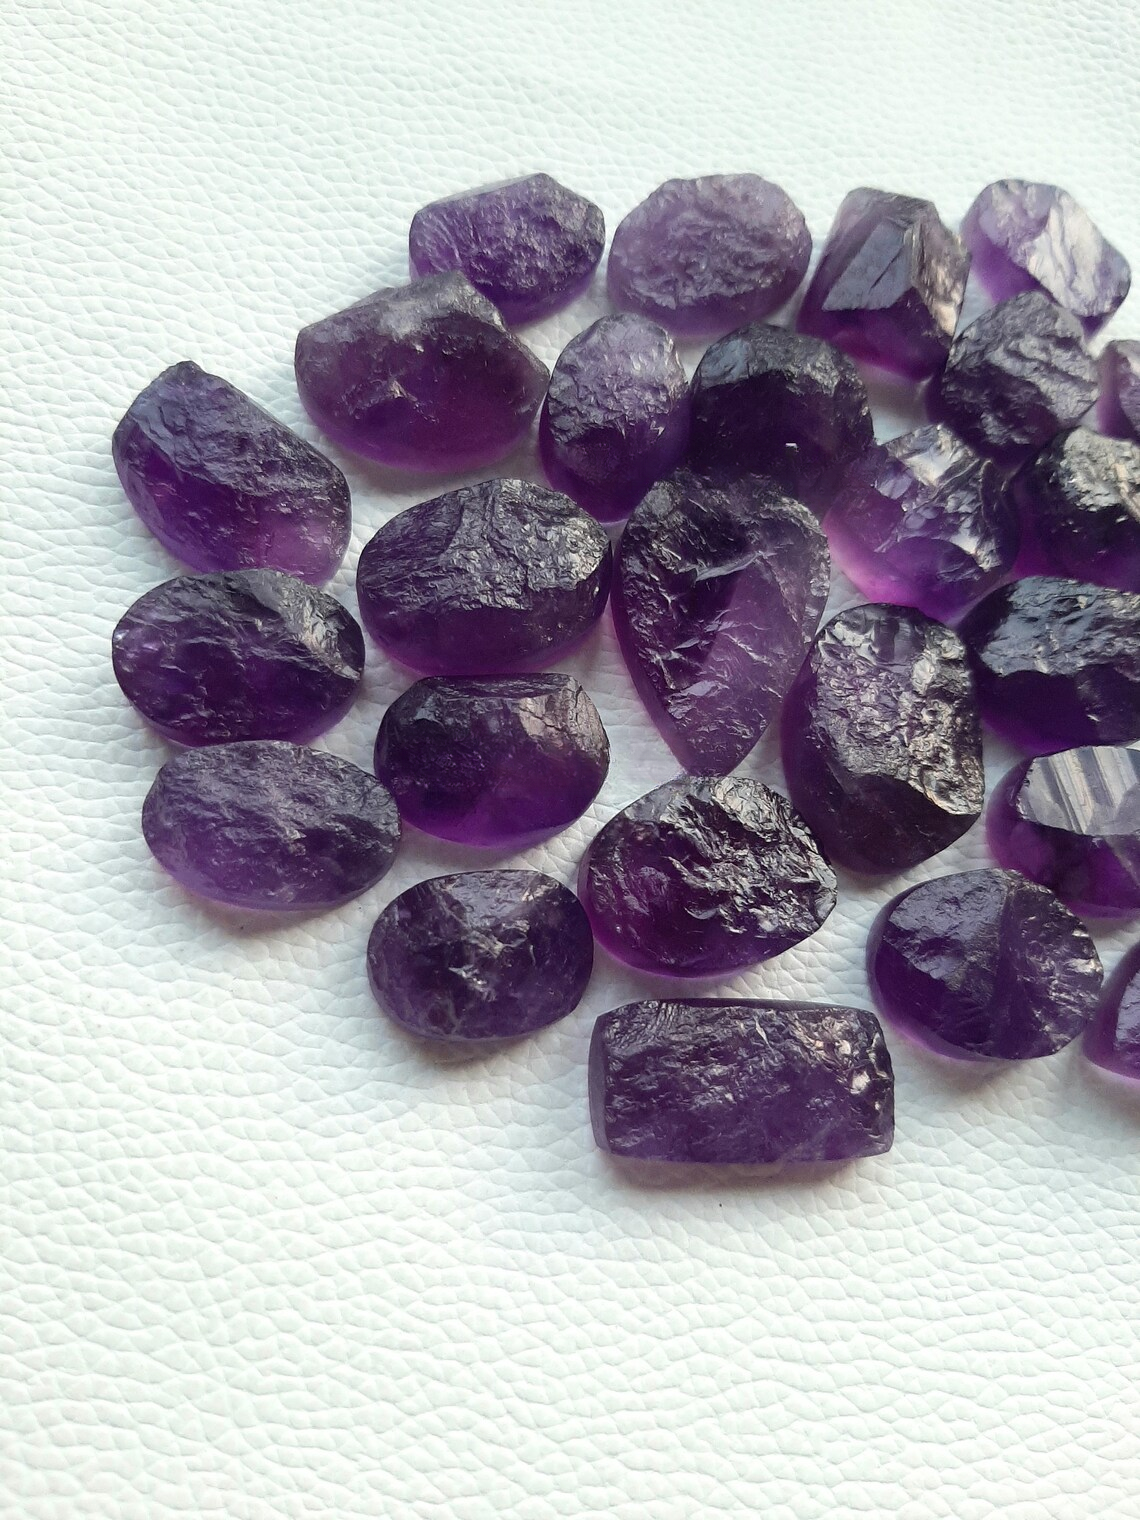 Natural Amethyst Druzy Cabochon, Wholesale Lot Cabochon By Weight With Different Shapes And Sizes Used For Jewelry Making (Natural)